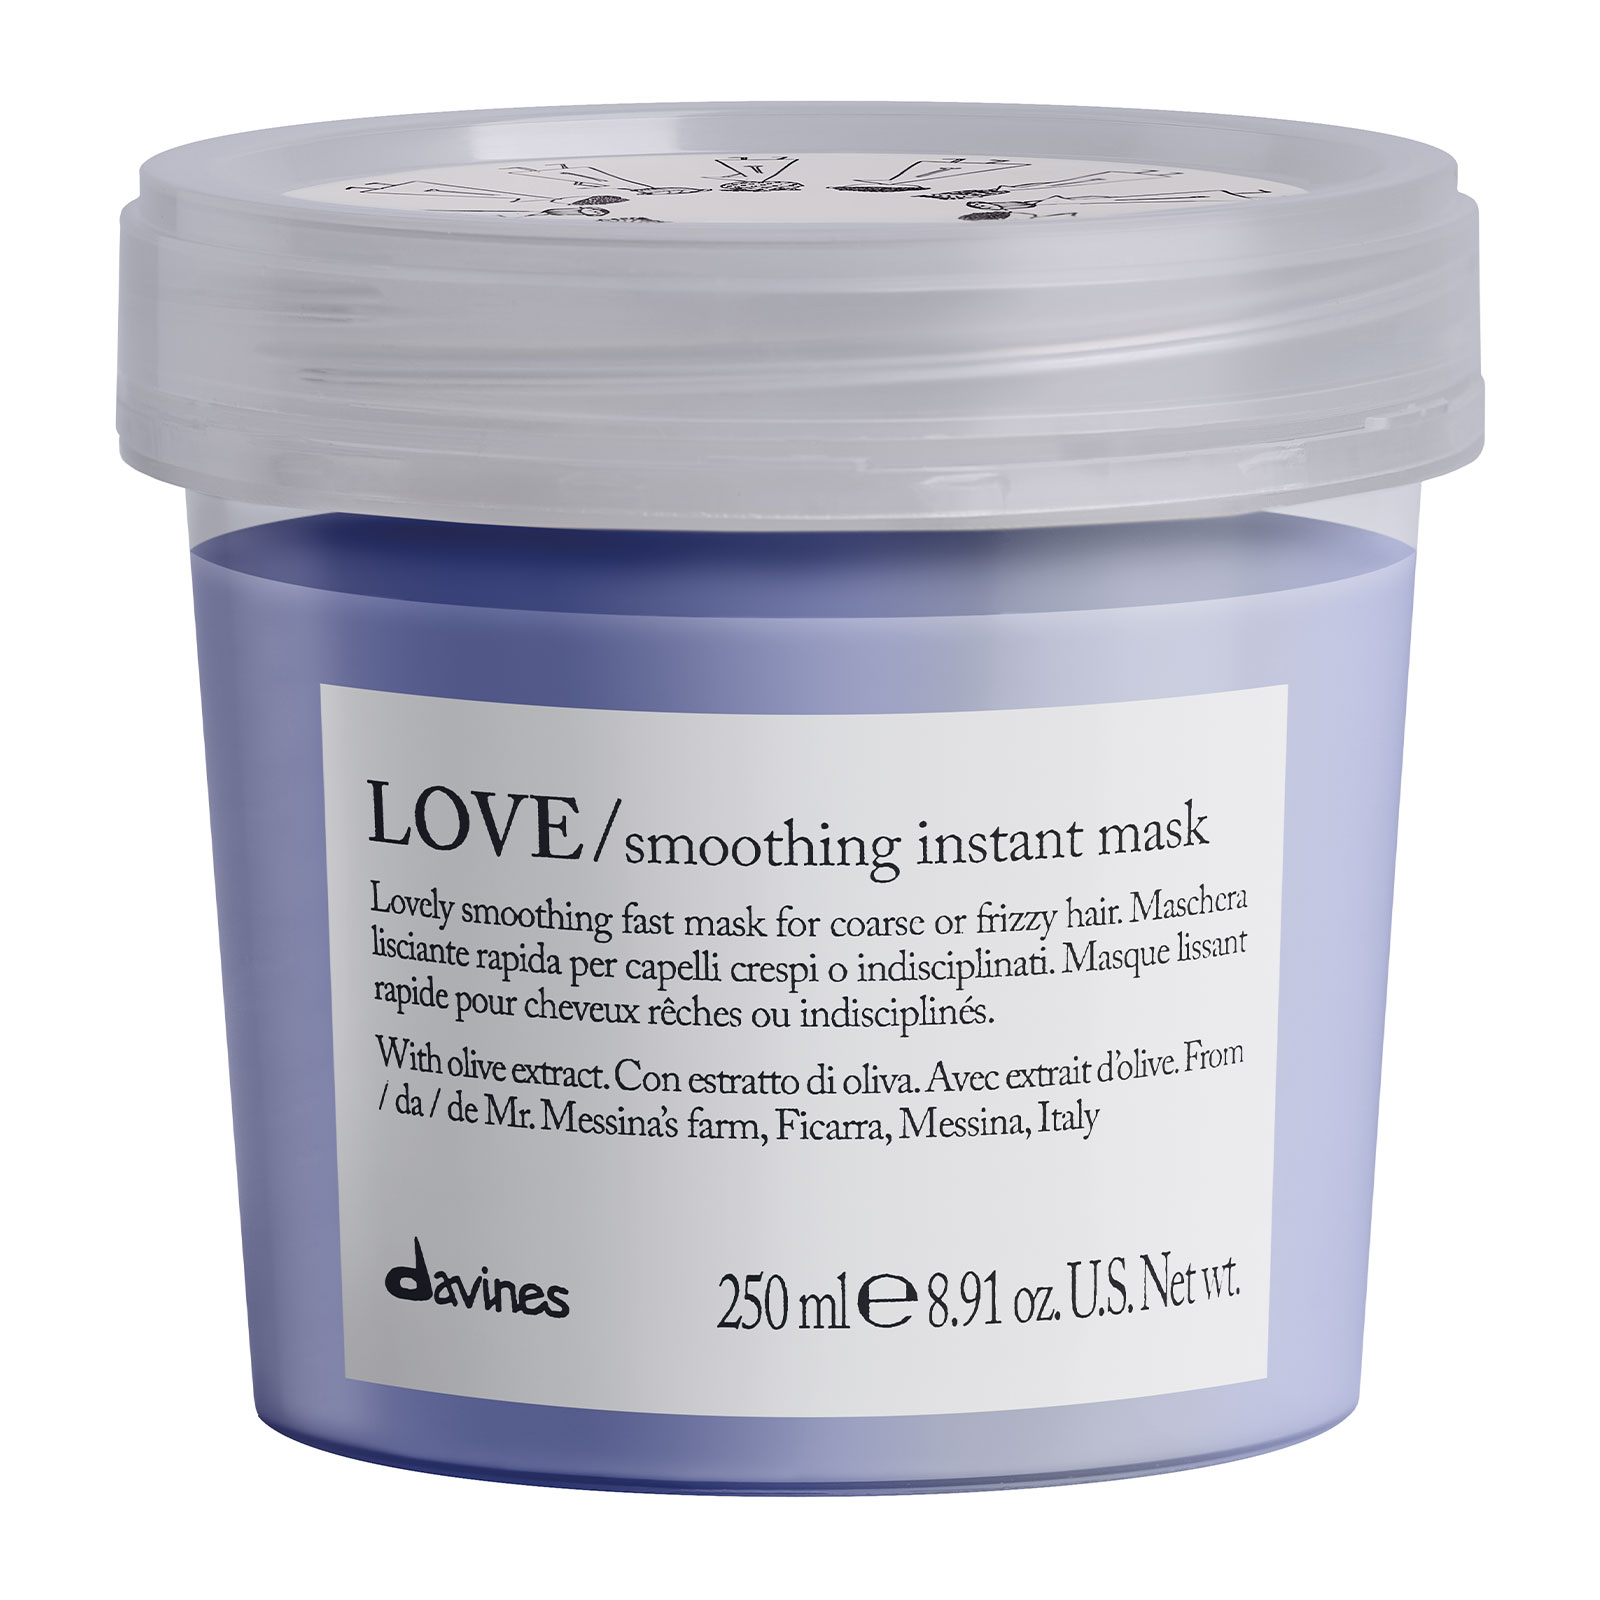 Davines Love Smoothing Instant Mask 250Ml